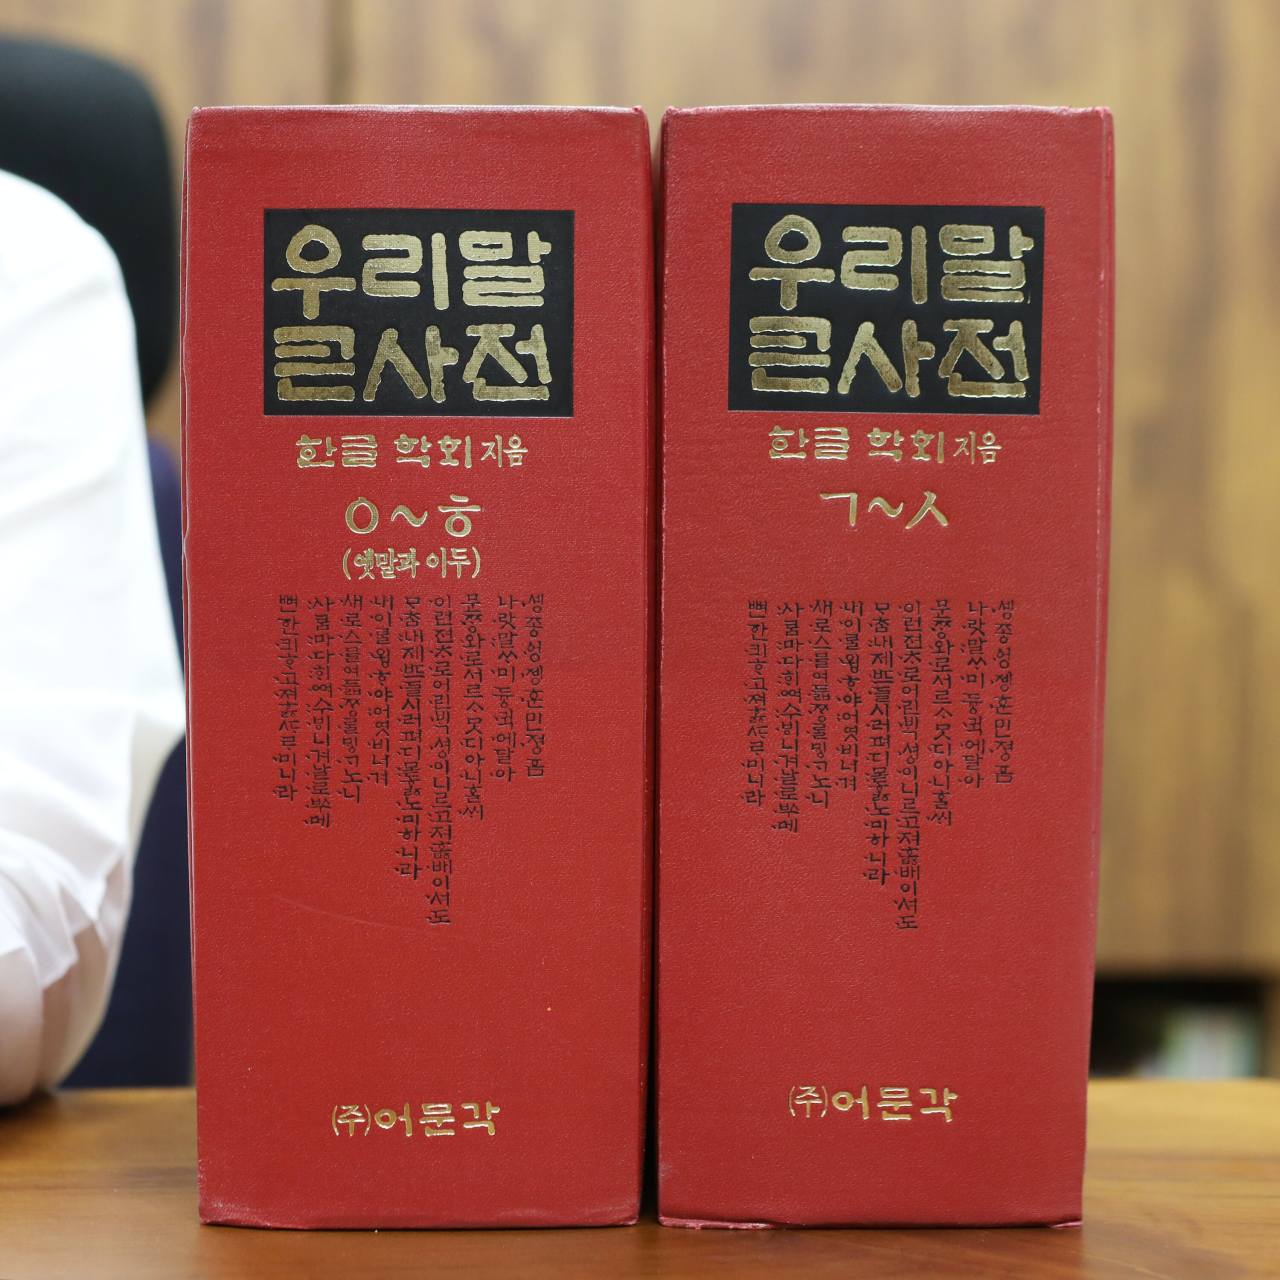 One of the last printed editions of the Great Korean Hangul Dictionary, published in 1994. Photo © 2020 Hyungwon Kang